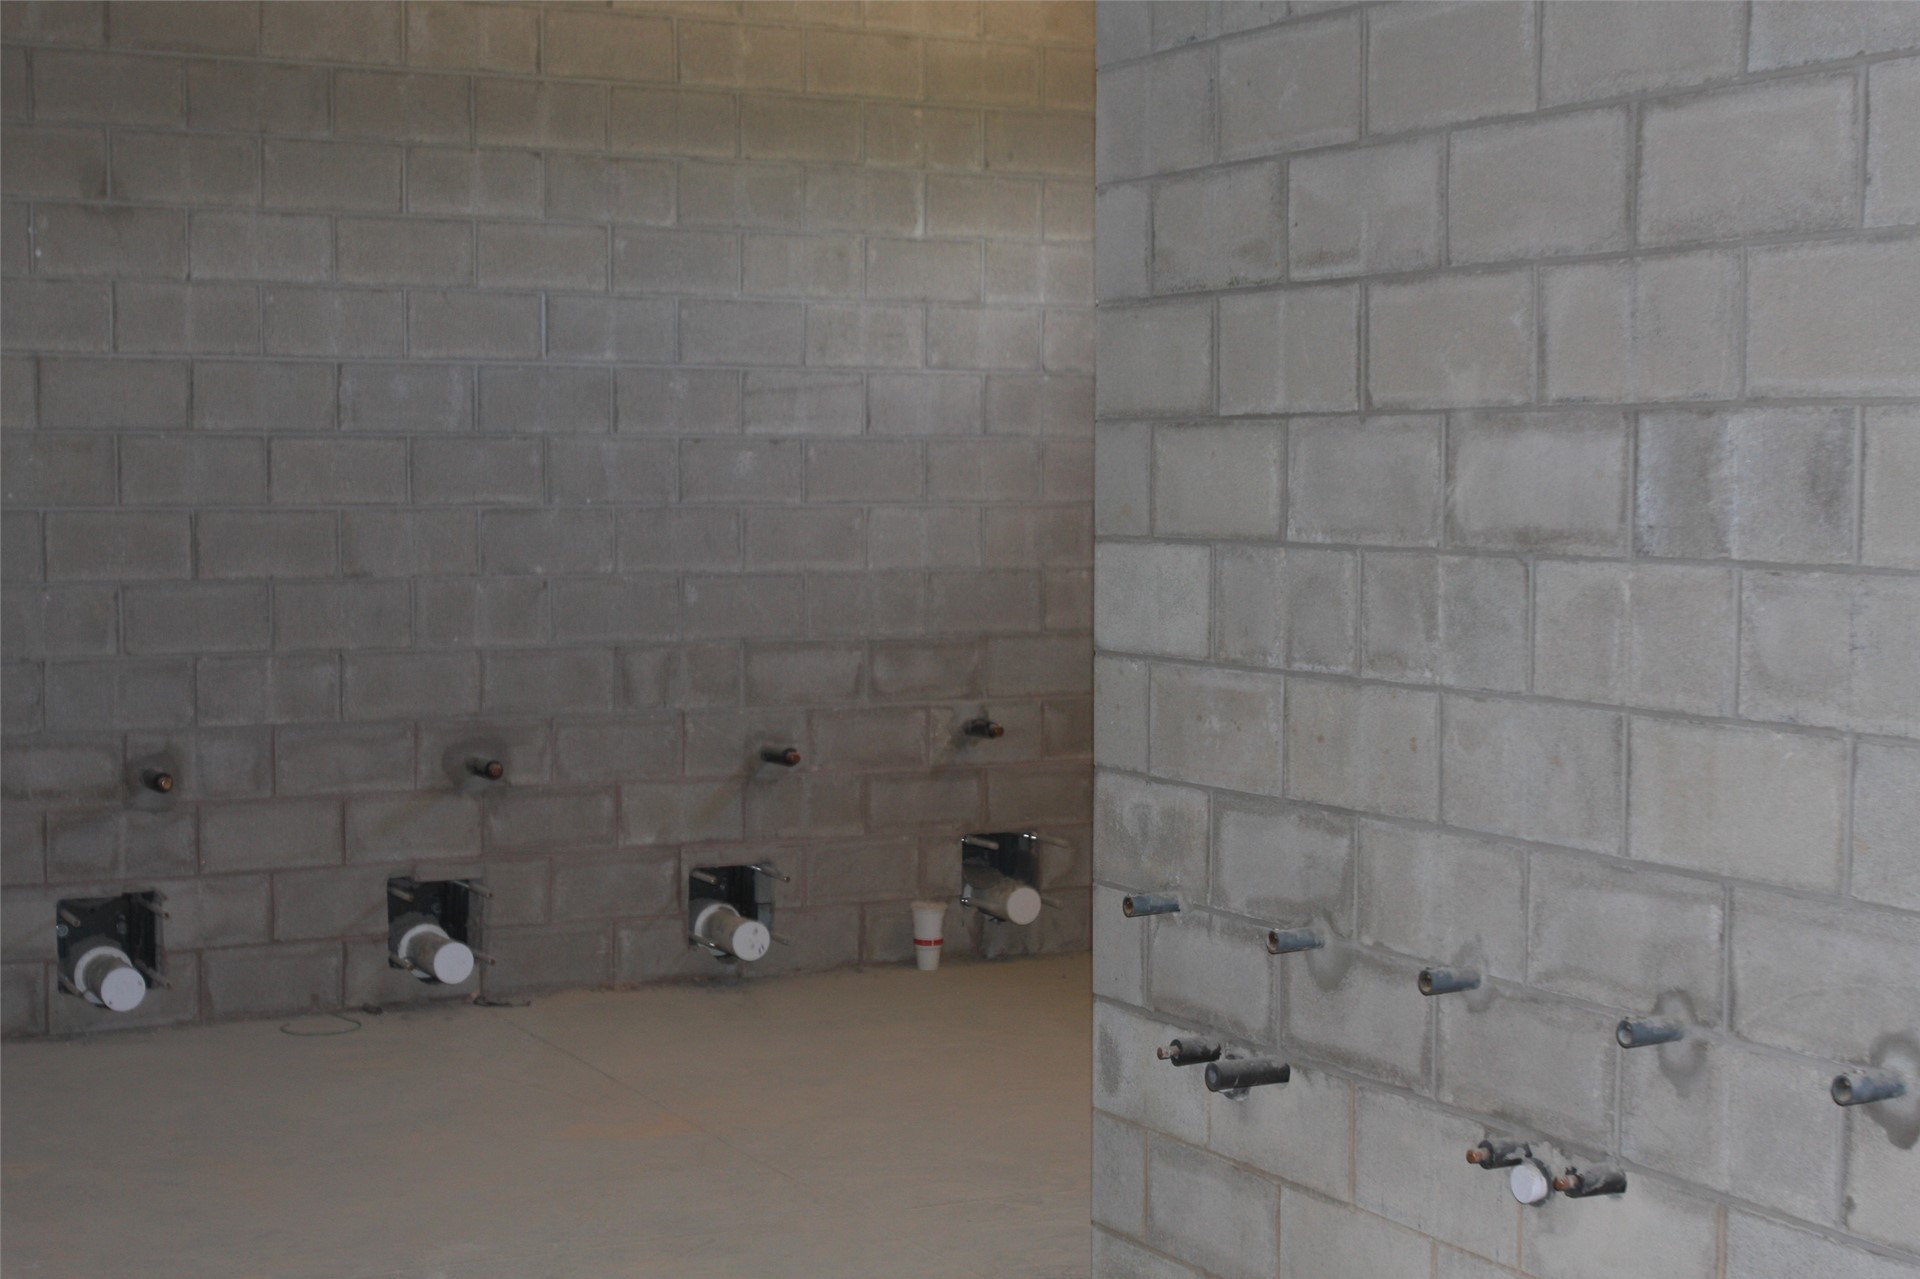 Plumbing is ready for toilets and sinks in the women’s restroom